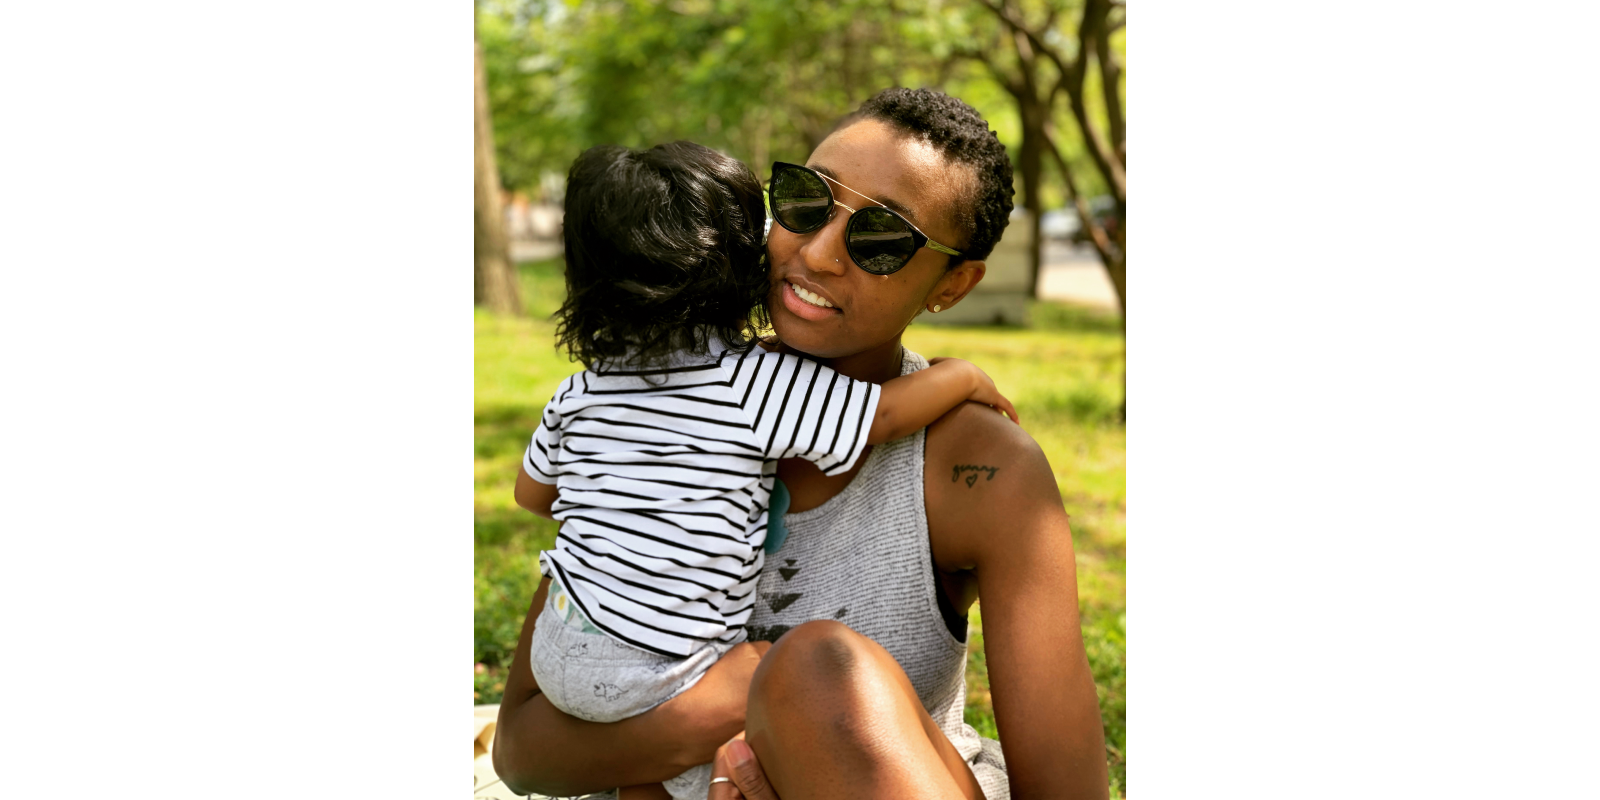 Portrait of Ashley Woodfolk in sunglasses and tank top holders her son who is facing the other direction in a black and white striped t-shirt.